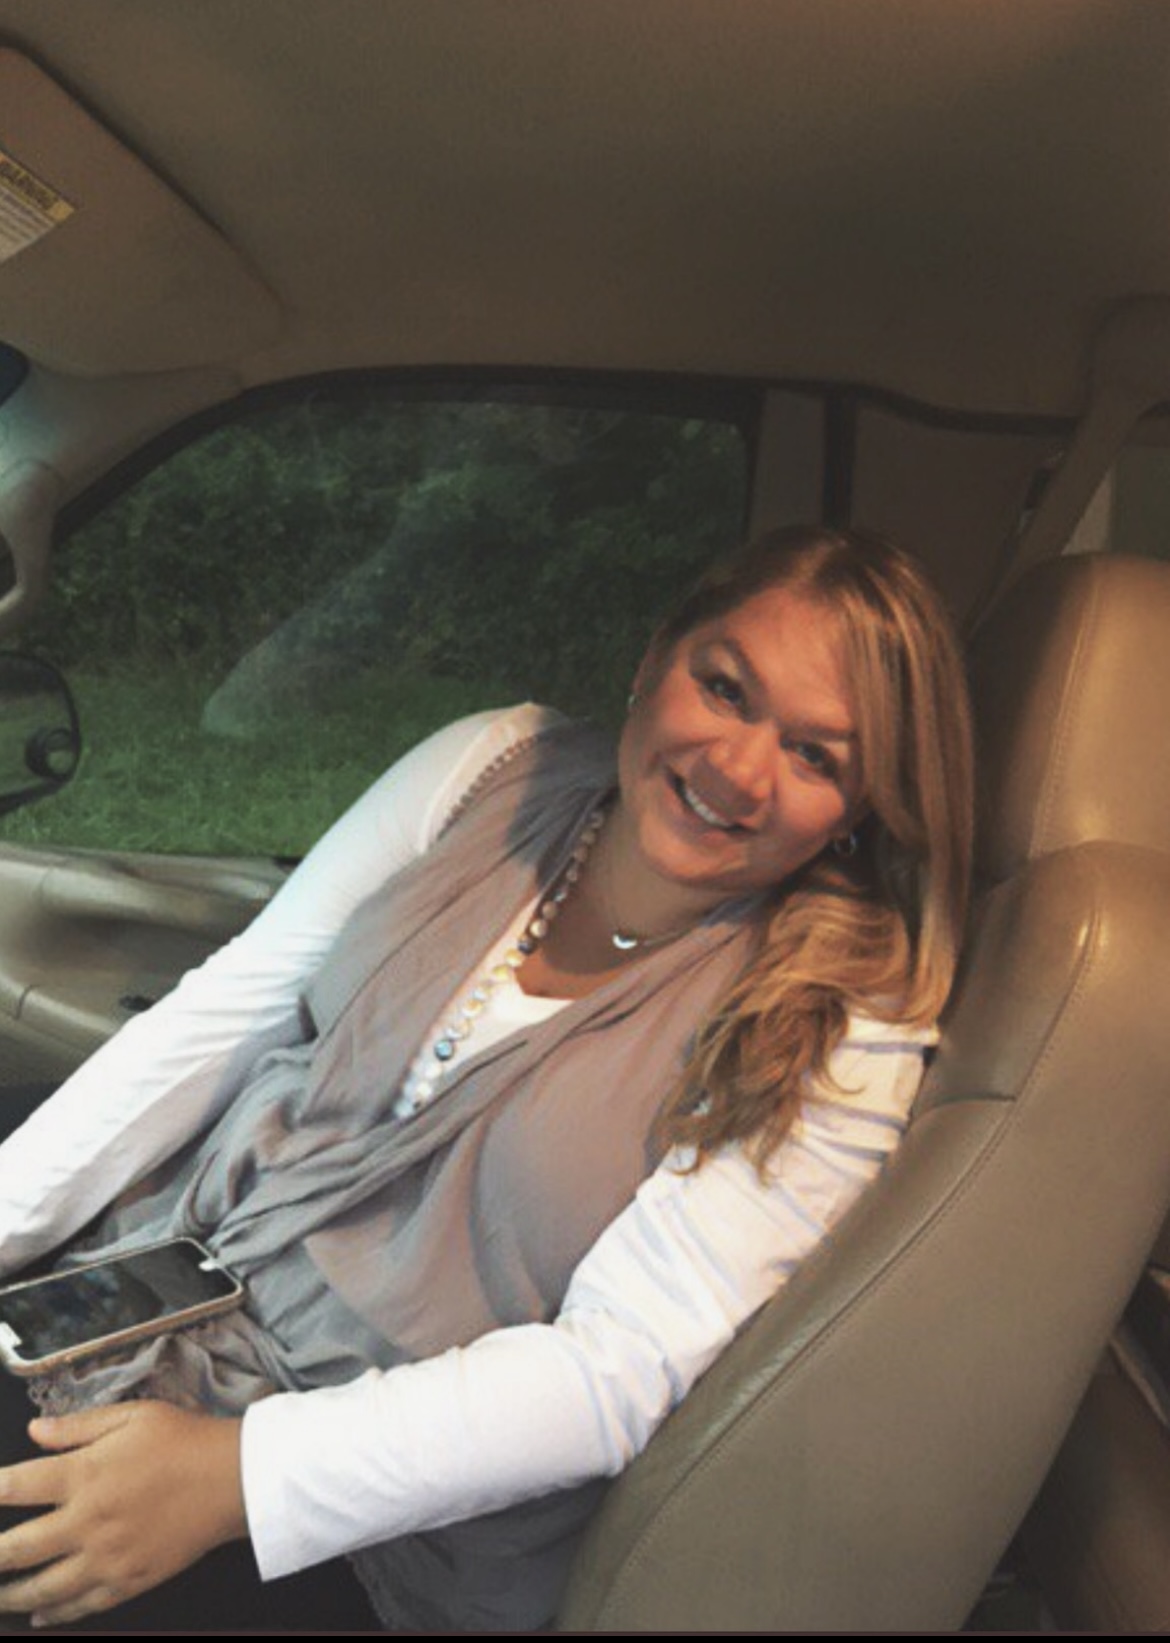 Pictured: Laura Wallen, a white woman with brownish-blond hair. She wears a white long-sleeve shirt, a flowy grey vest, and a long beaded necklace. She is smiling at the camera while leaning against the passenger seat of a vehicle; her iPhone sits on her lap.